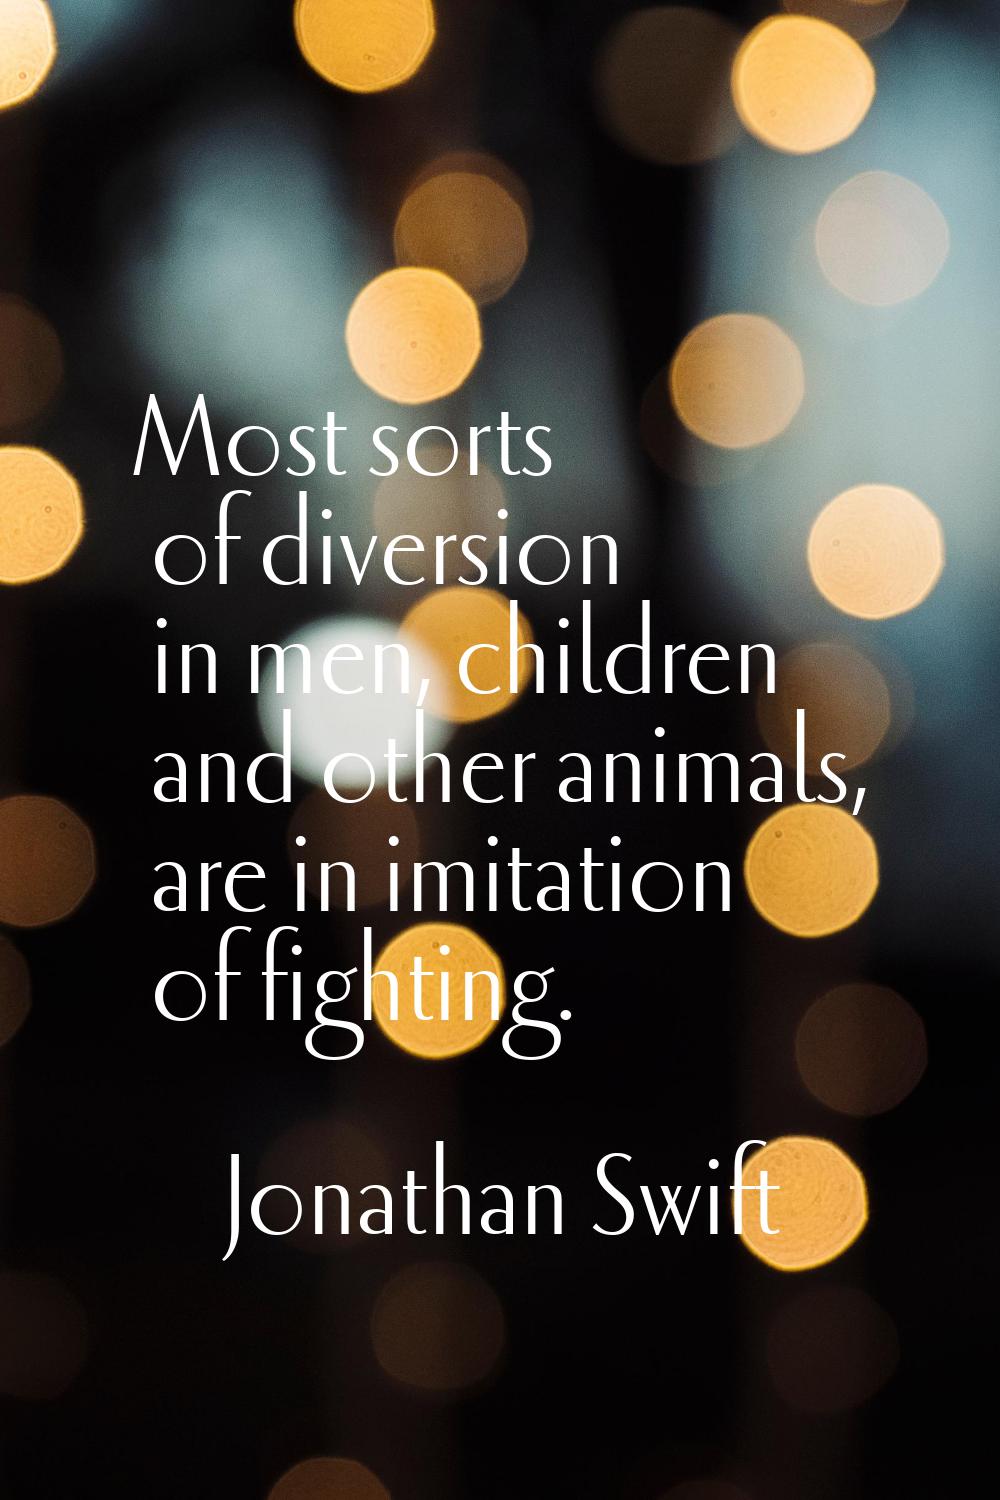 Most sorts of diversion in men, children and other animals, are in imitation of fighting.